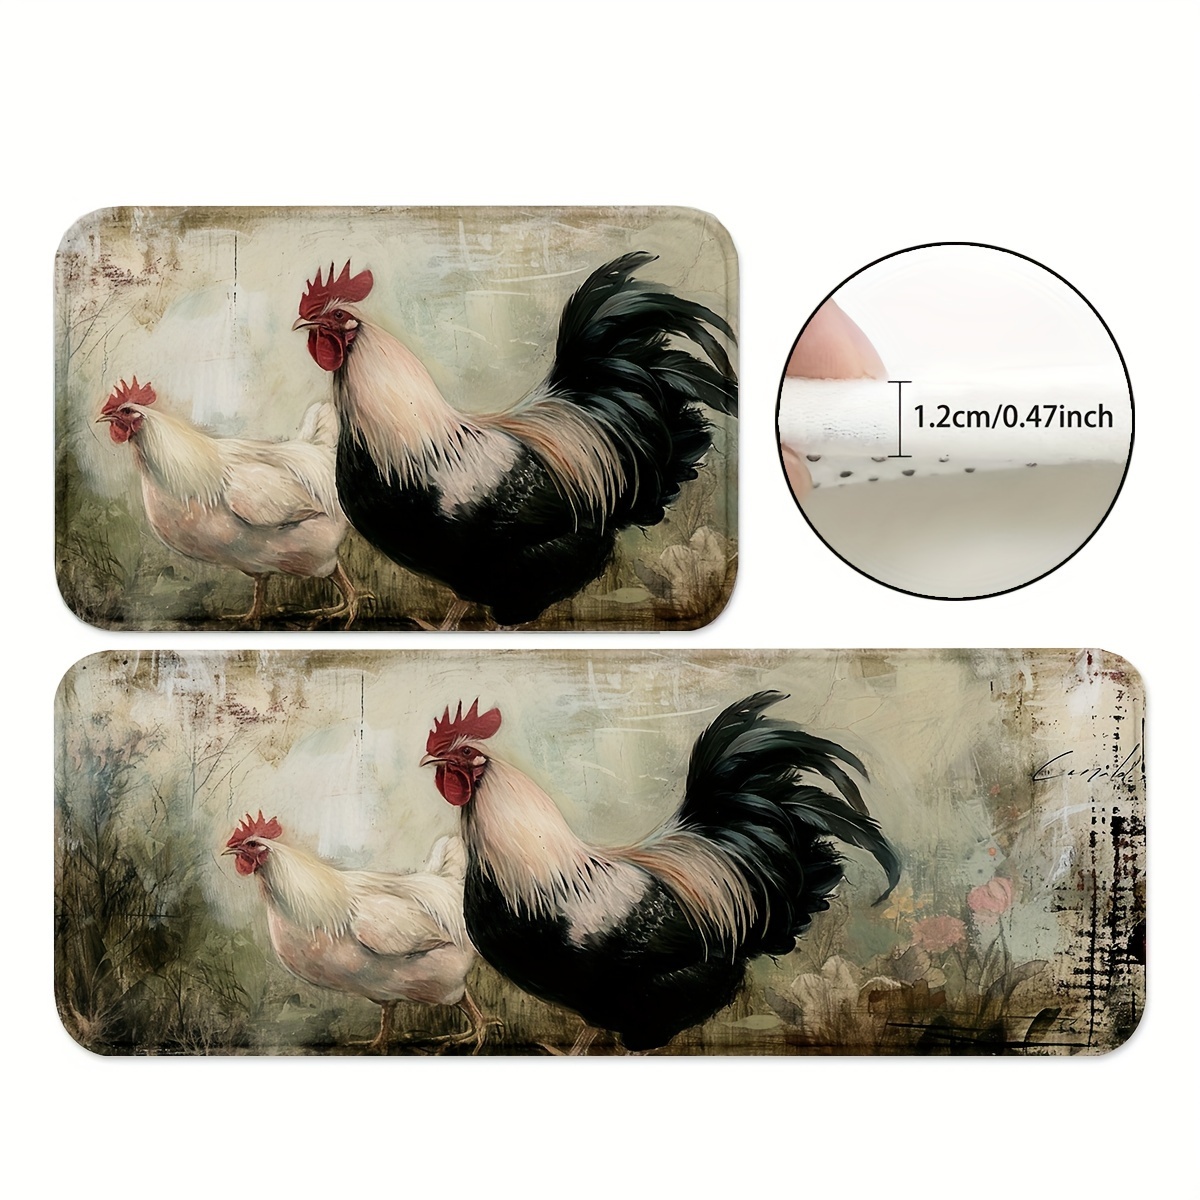 

1/2pcs Creative Rooster Print Kitchen Mats, Rural Life Themed Throw Carpets, Washable Corridor Runner Rugs, Cushions For Home Office Spring Decor Farmhouse High Traffic Area Hotel Rural Zone Indoors